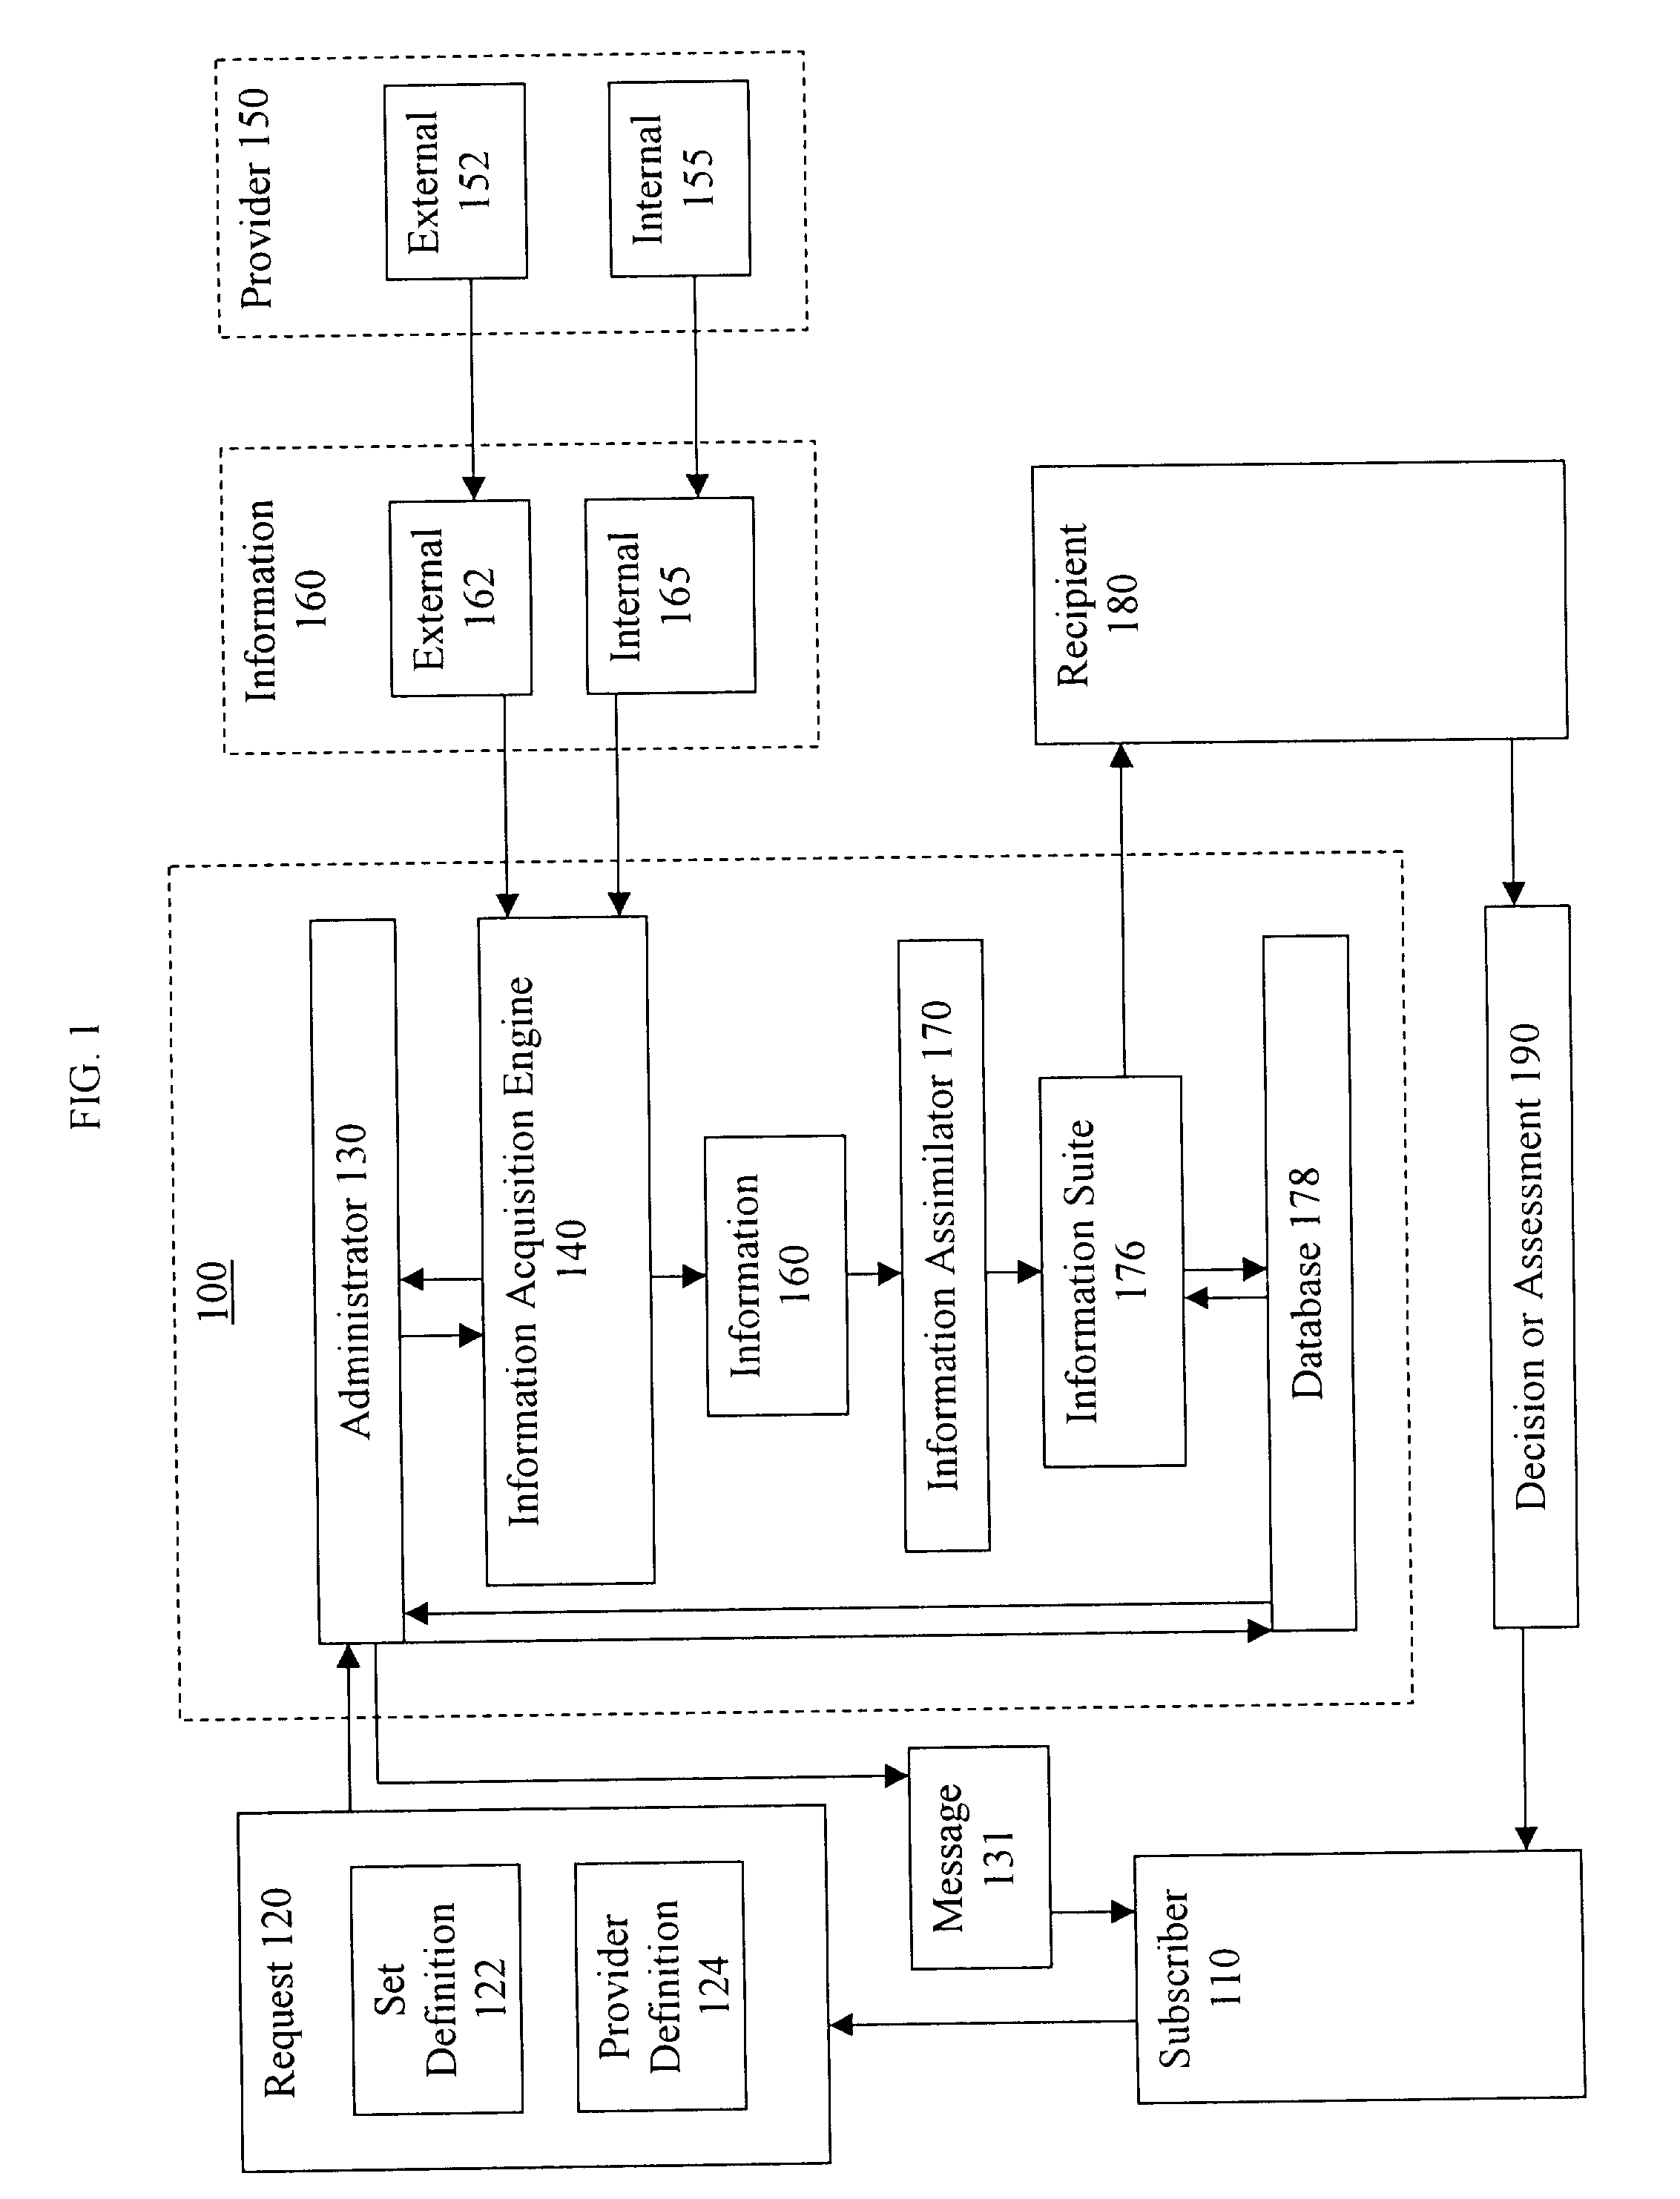 System and method for facilitating information collection, storage, and distribution